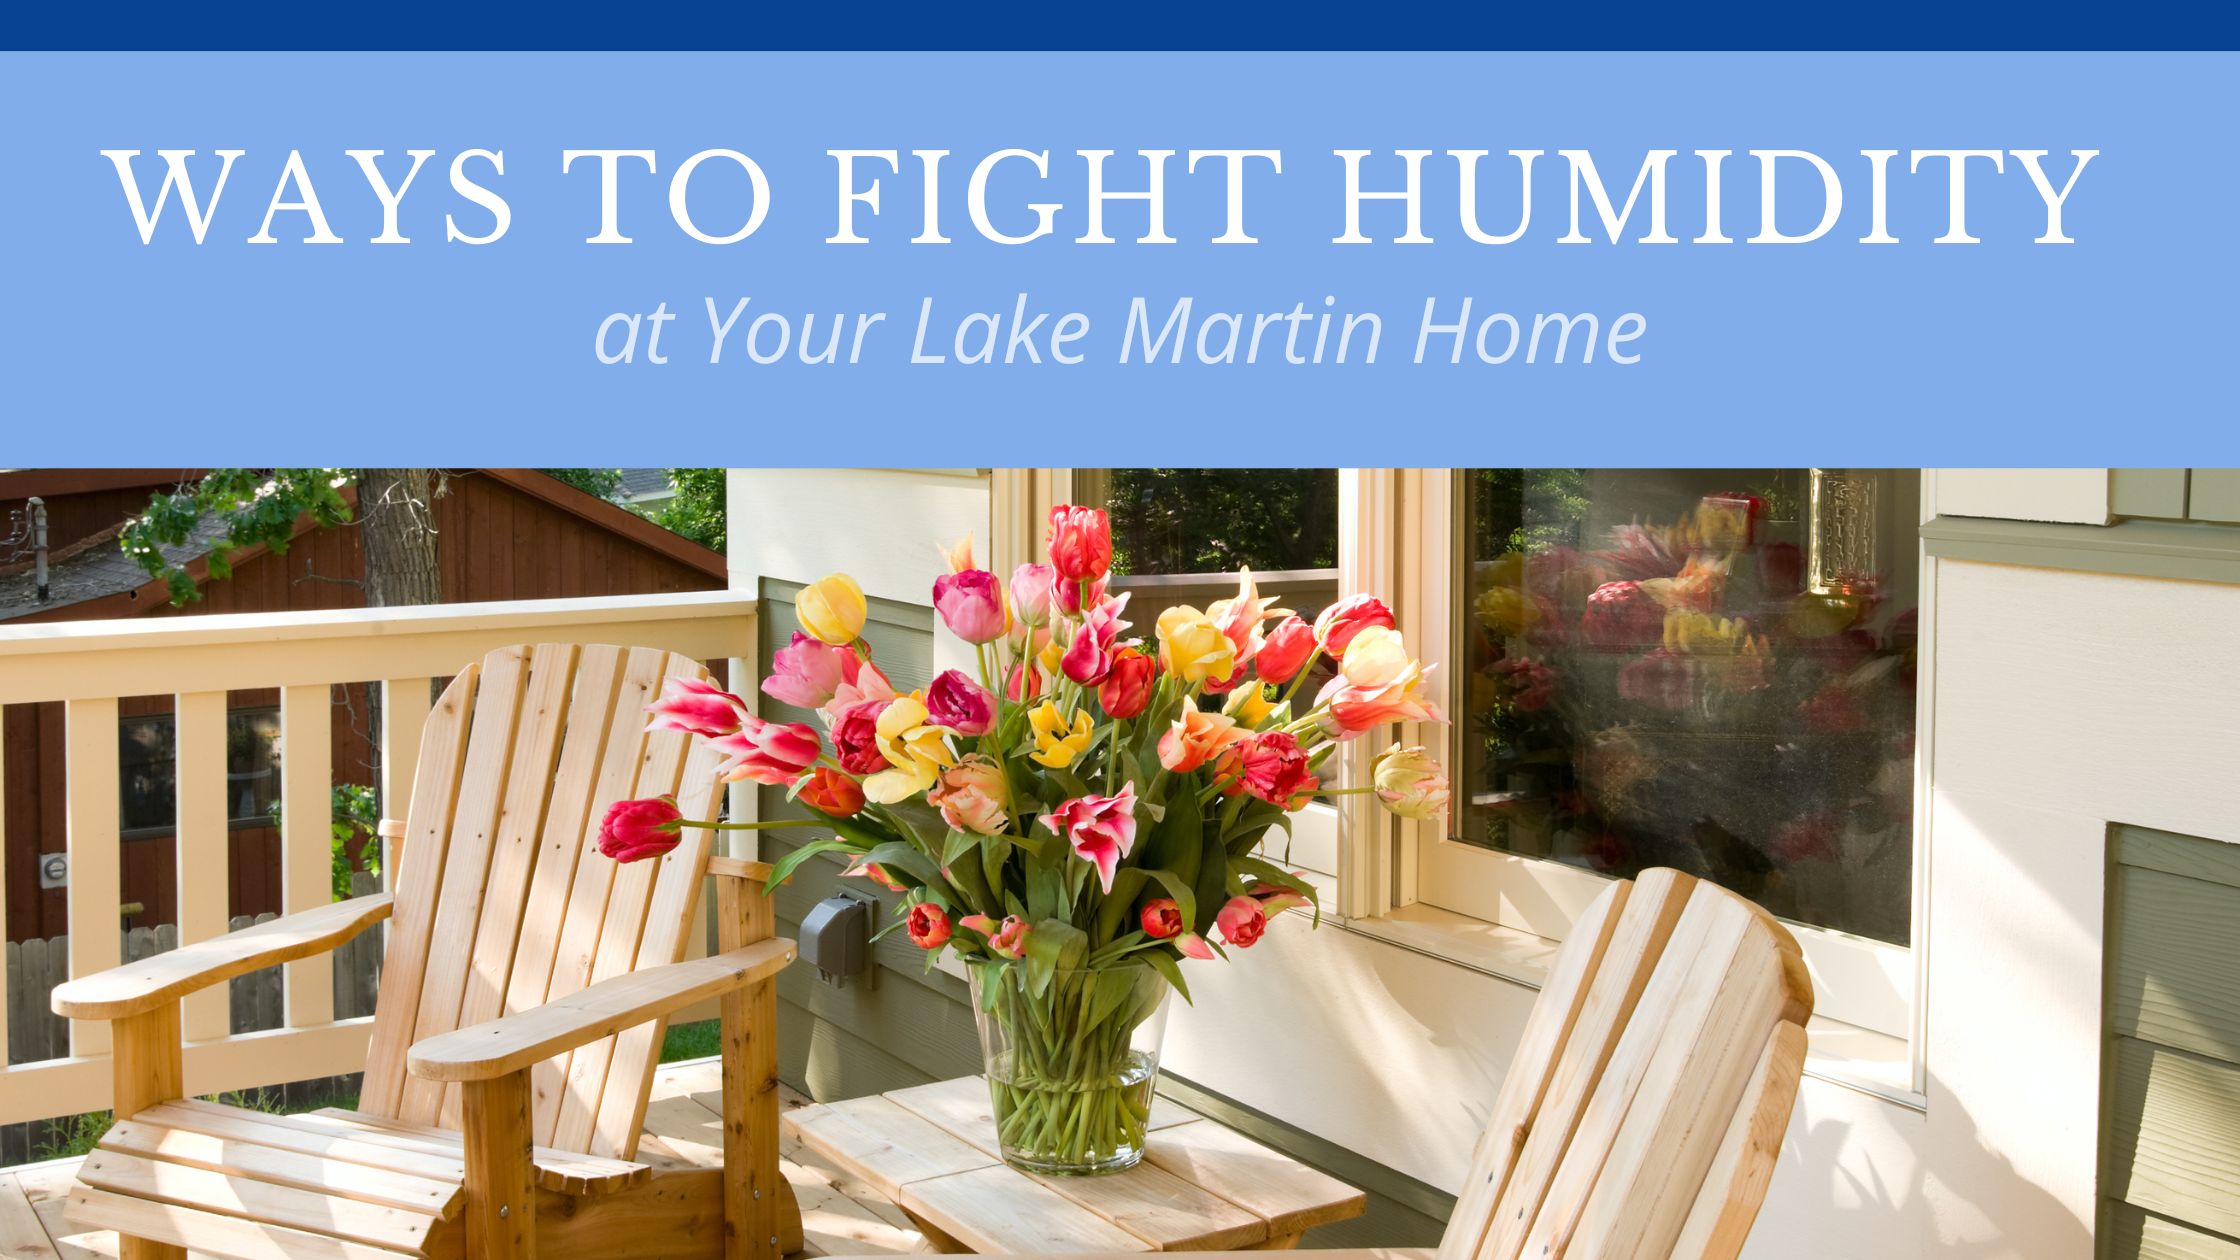 Ways to Fight Humidity at your Lake Martin Home